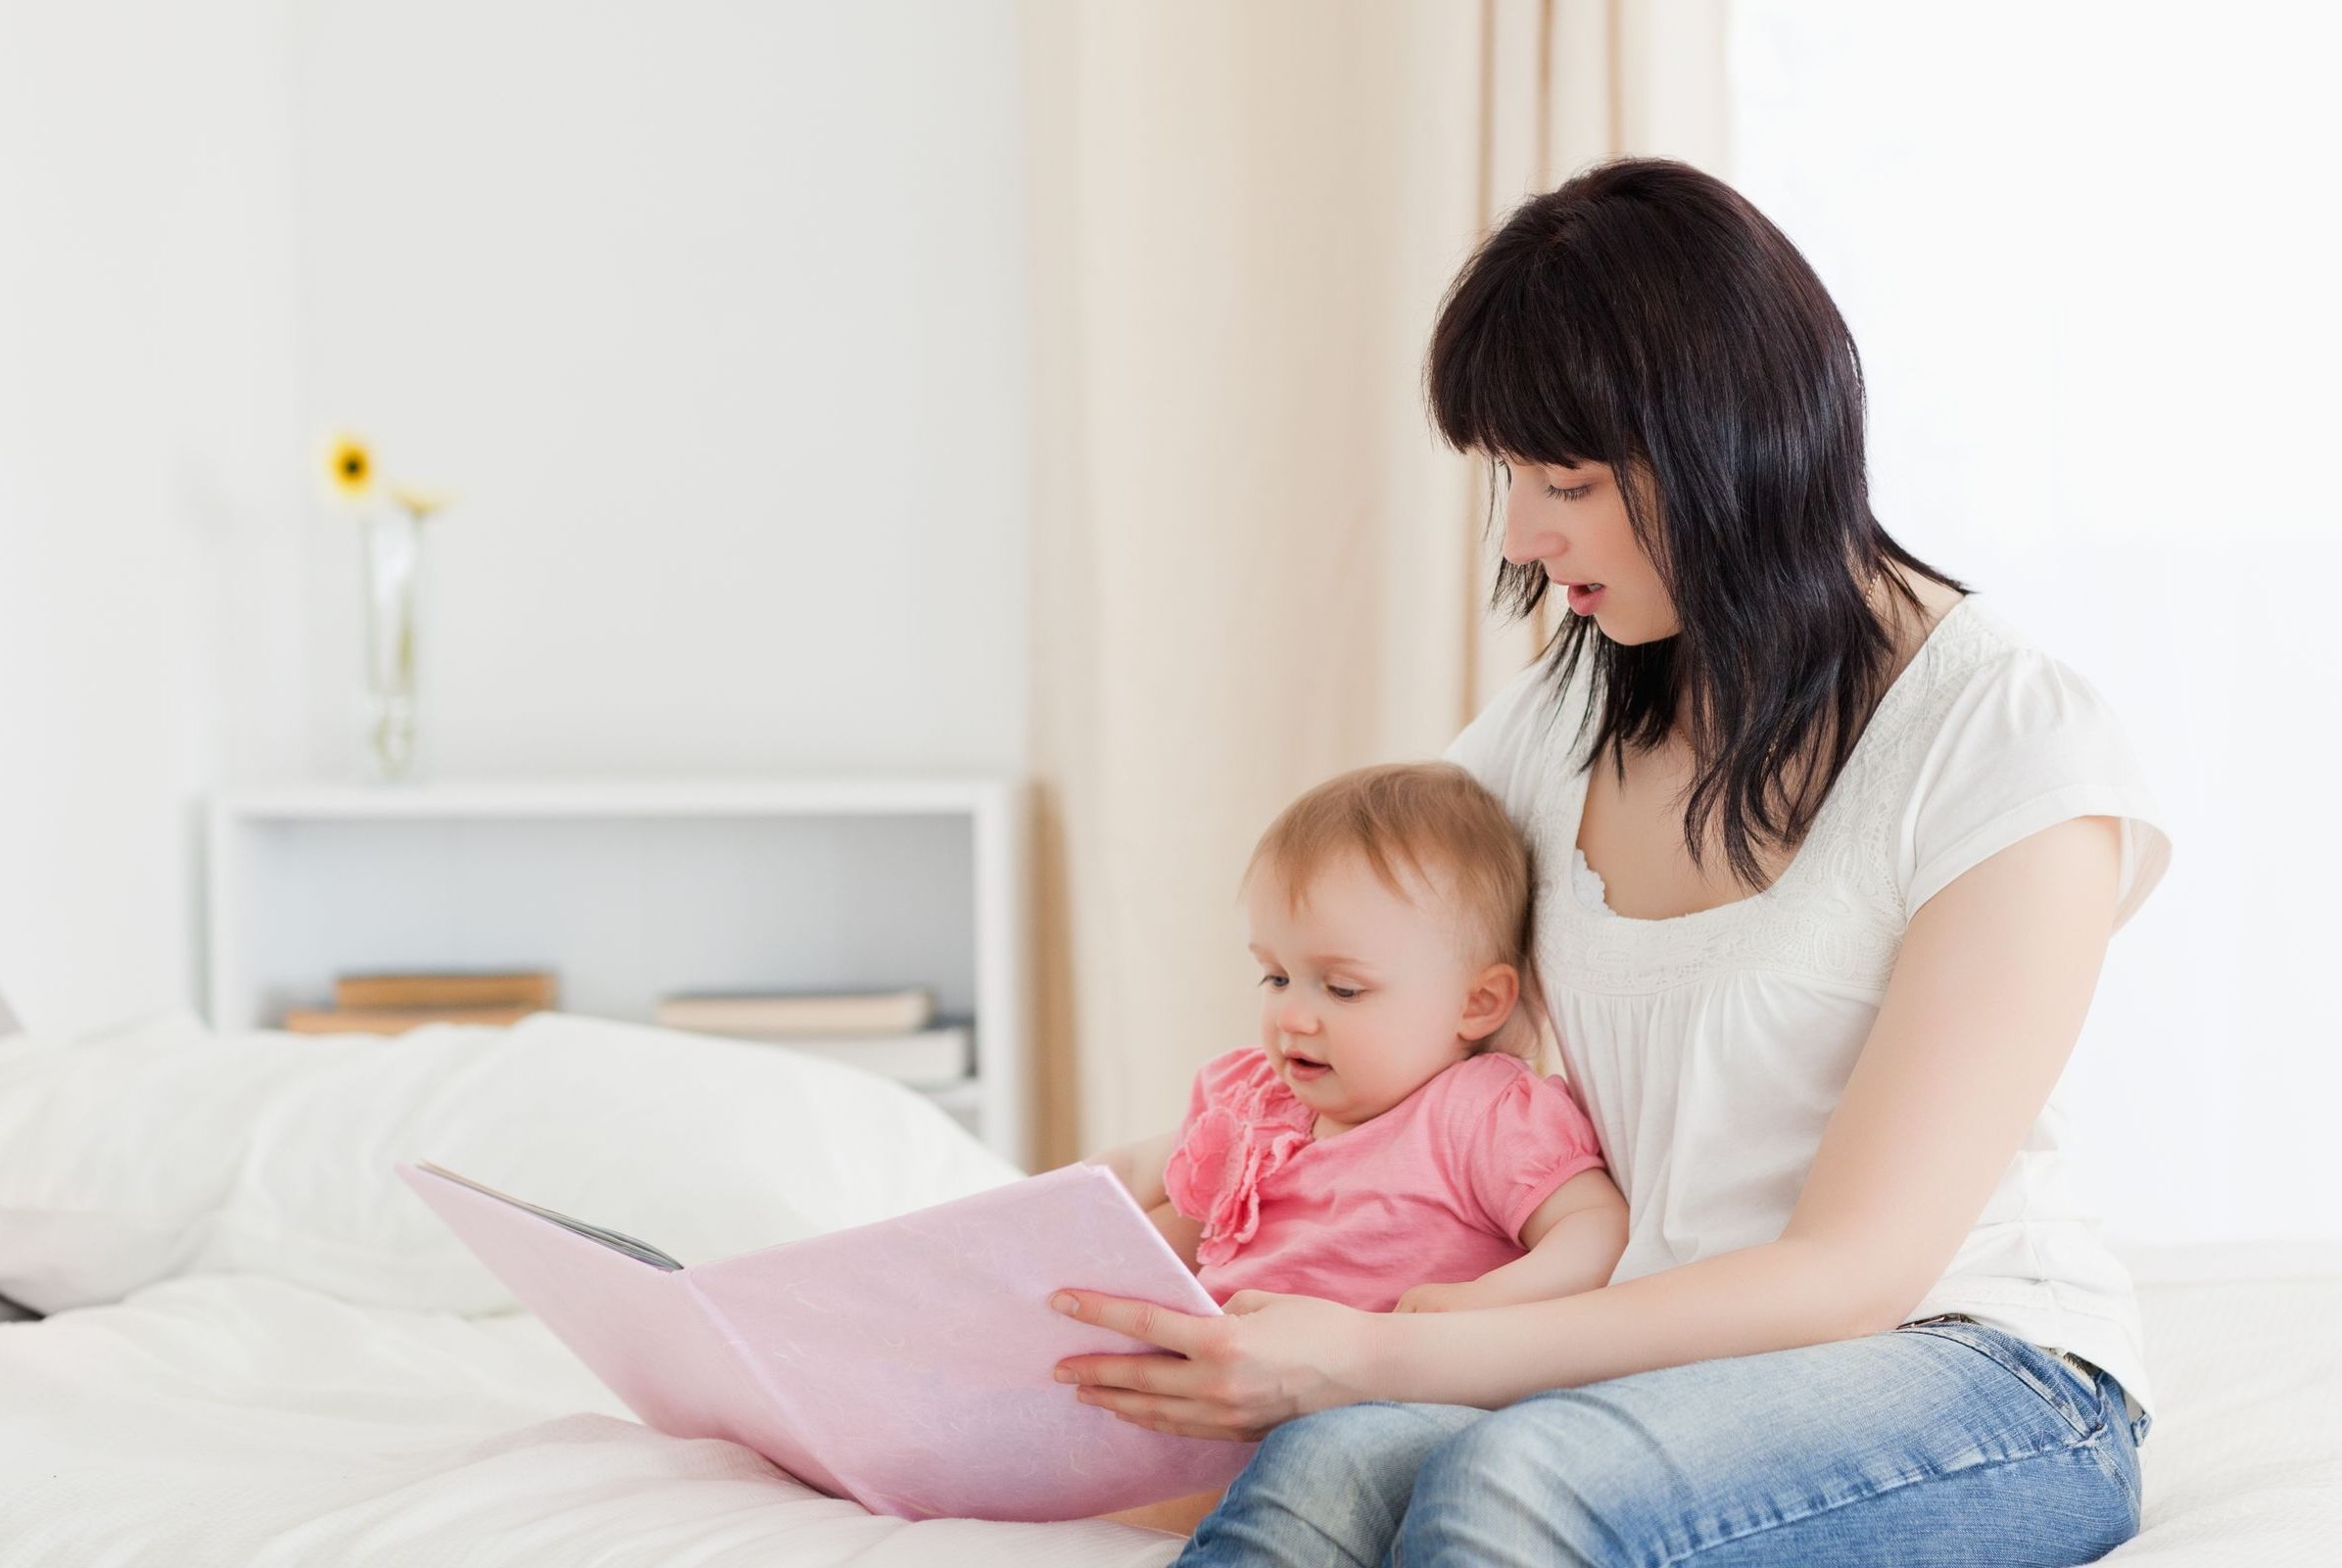 10220941 - attractive brunette woman showing a book to her baby while sitting on a bed in her appartment